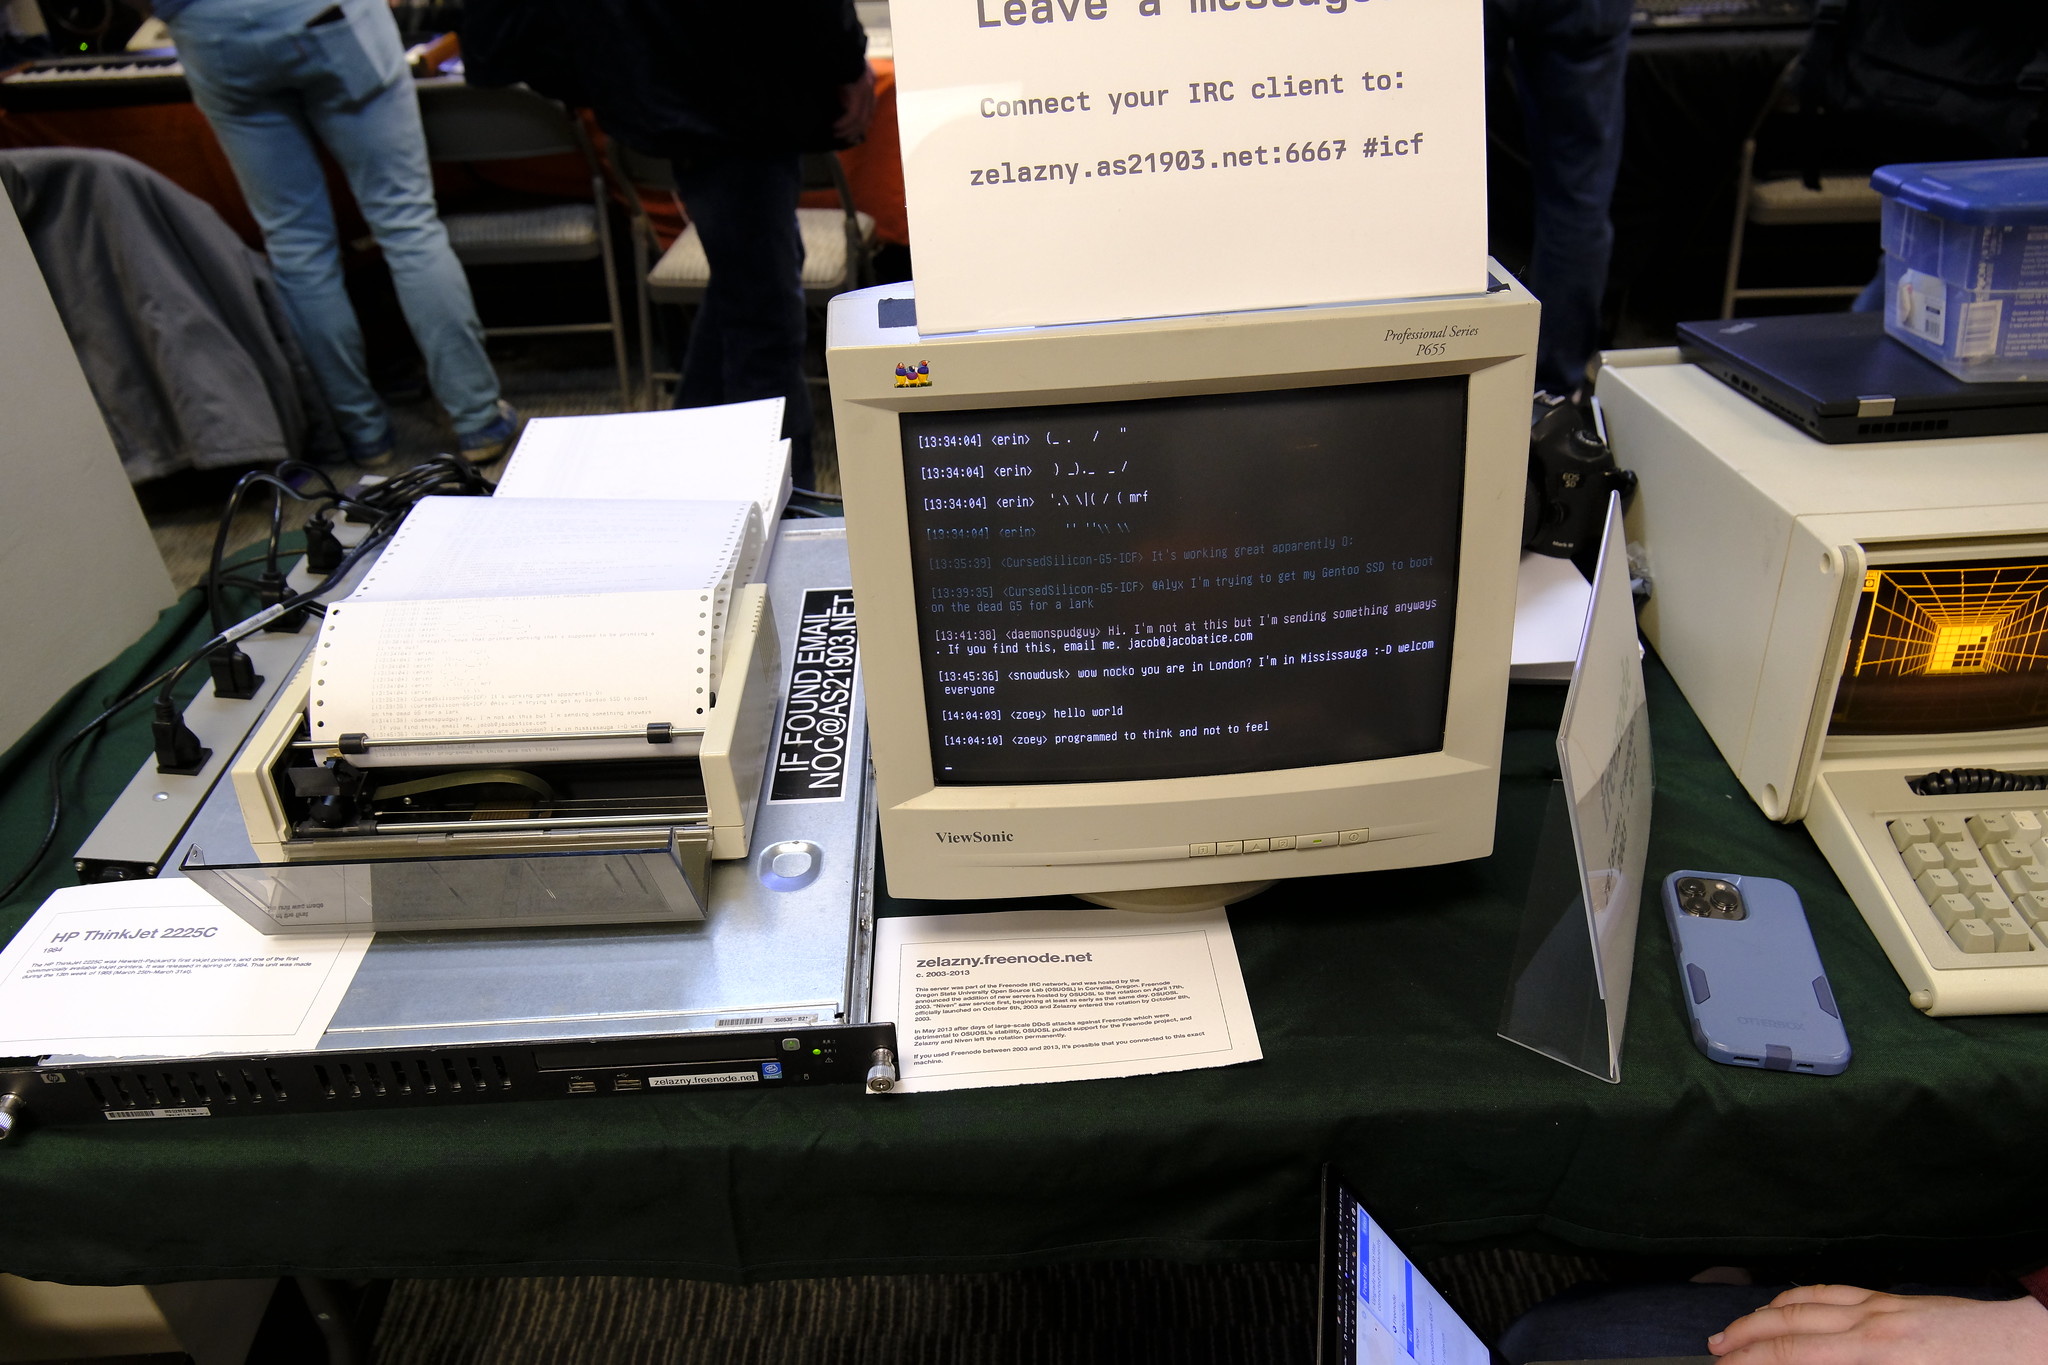 the IRC display, as described in this section